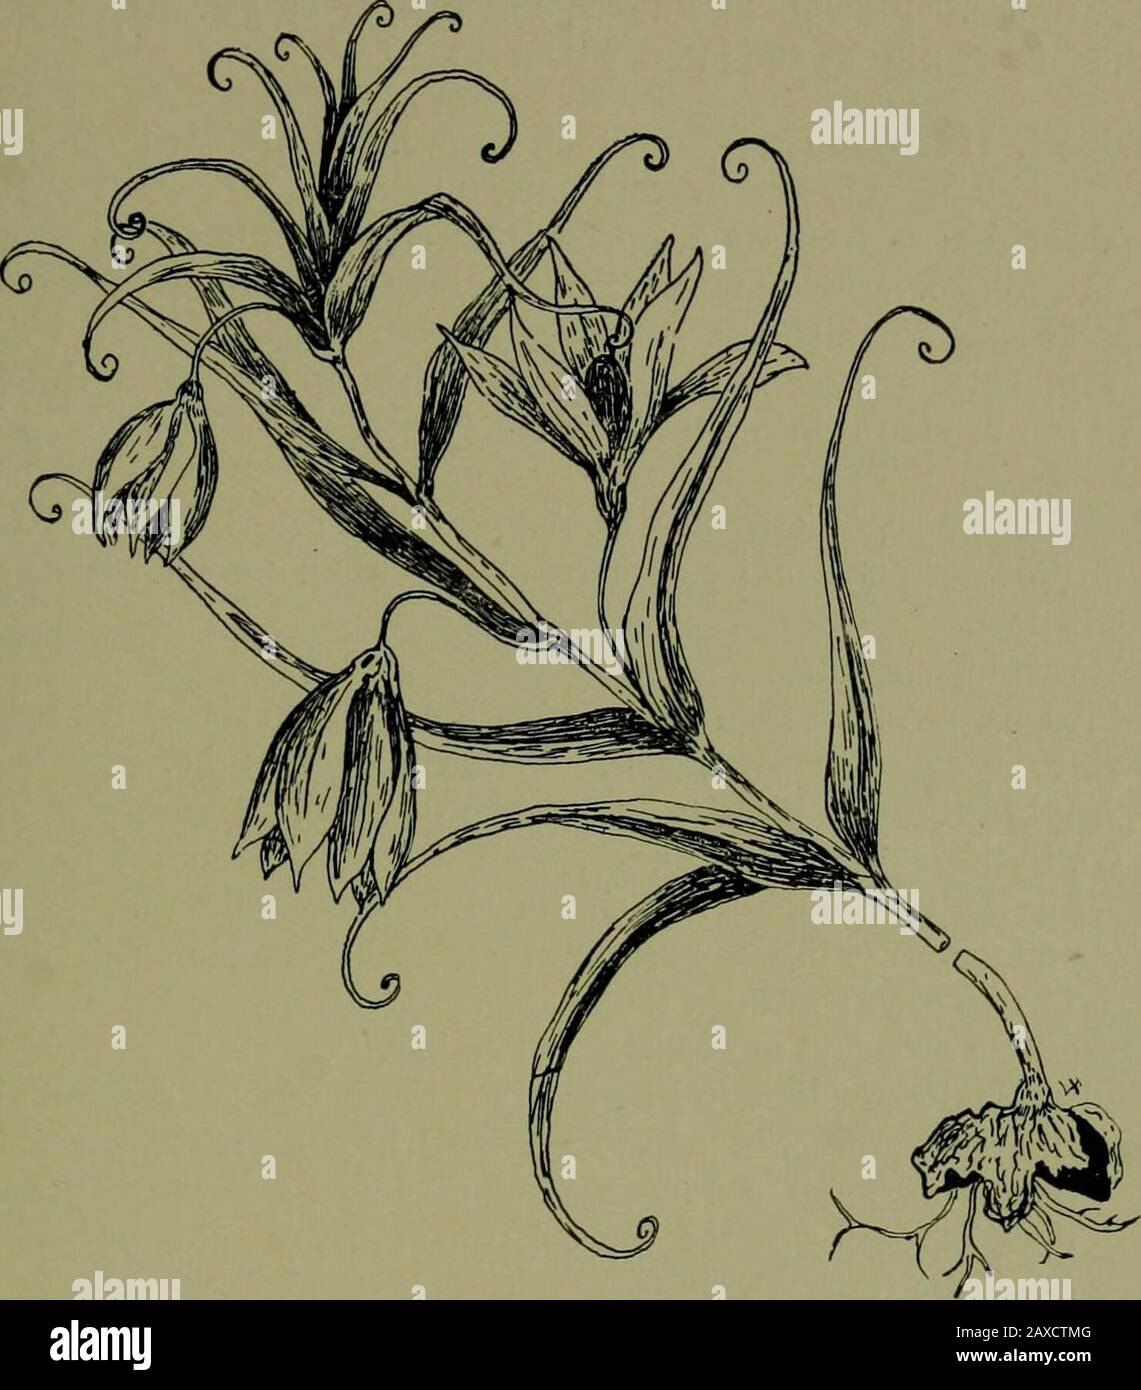 Plants and their ways in South Africa . Fig. 236.—Gloriosa superba, Linn. base; stigma 3-lobed. Seeds many, bright red. Flowers largeand handsome. Rootstock tuberous; stem slender, climbinglike Littonia by the curled leaf tips. From Albany to Natal. Sandy hills. Sandersonia.—Perianth tube tapering toward the throat,globose. Flowers bright yellow, hanging on slender stalksfrom the upper axils of the leaves. Leaves sessile alternate,2 to 4 inches long,  to S inch broad. Stems 1-2 feet high,leafy. Found in the Eastern region. Classification of Plants 261. Fig. 22)7.—Littonia modesta, Hook.Order Stock Photo